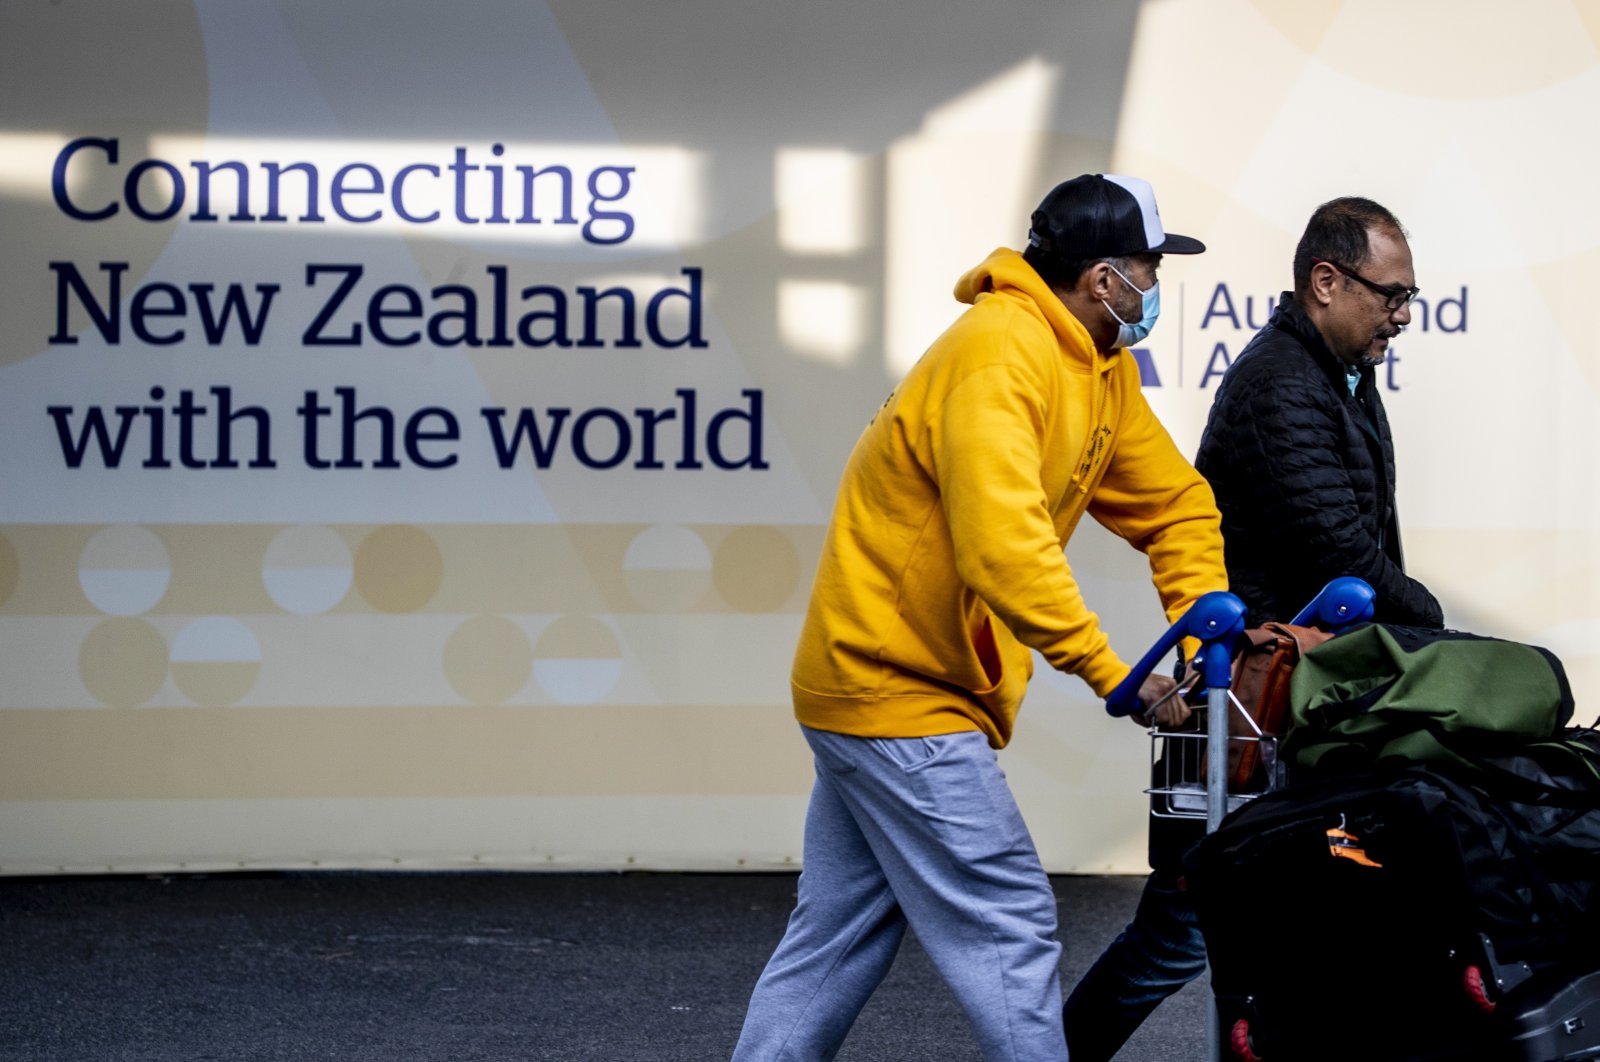 Passengers arrive at Auckland International Airport, in Auckland, New Zealand, March 16, 2022. (AP Photo)